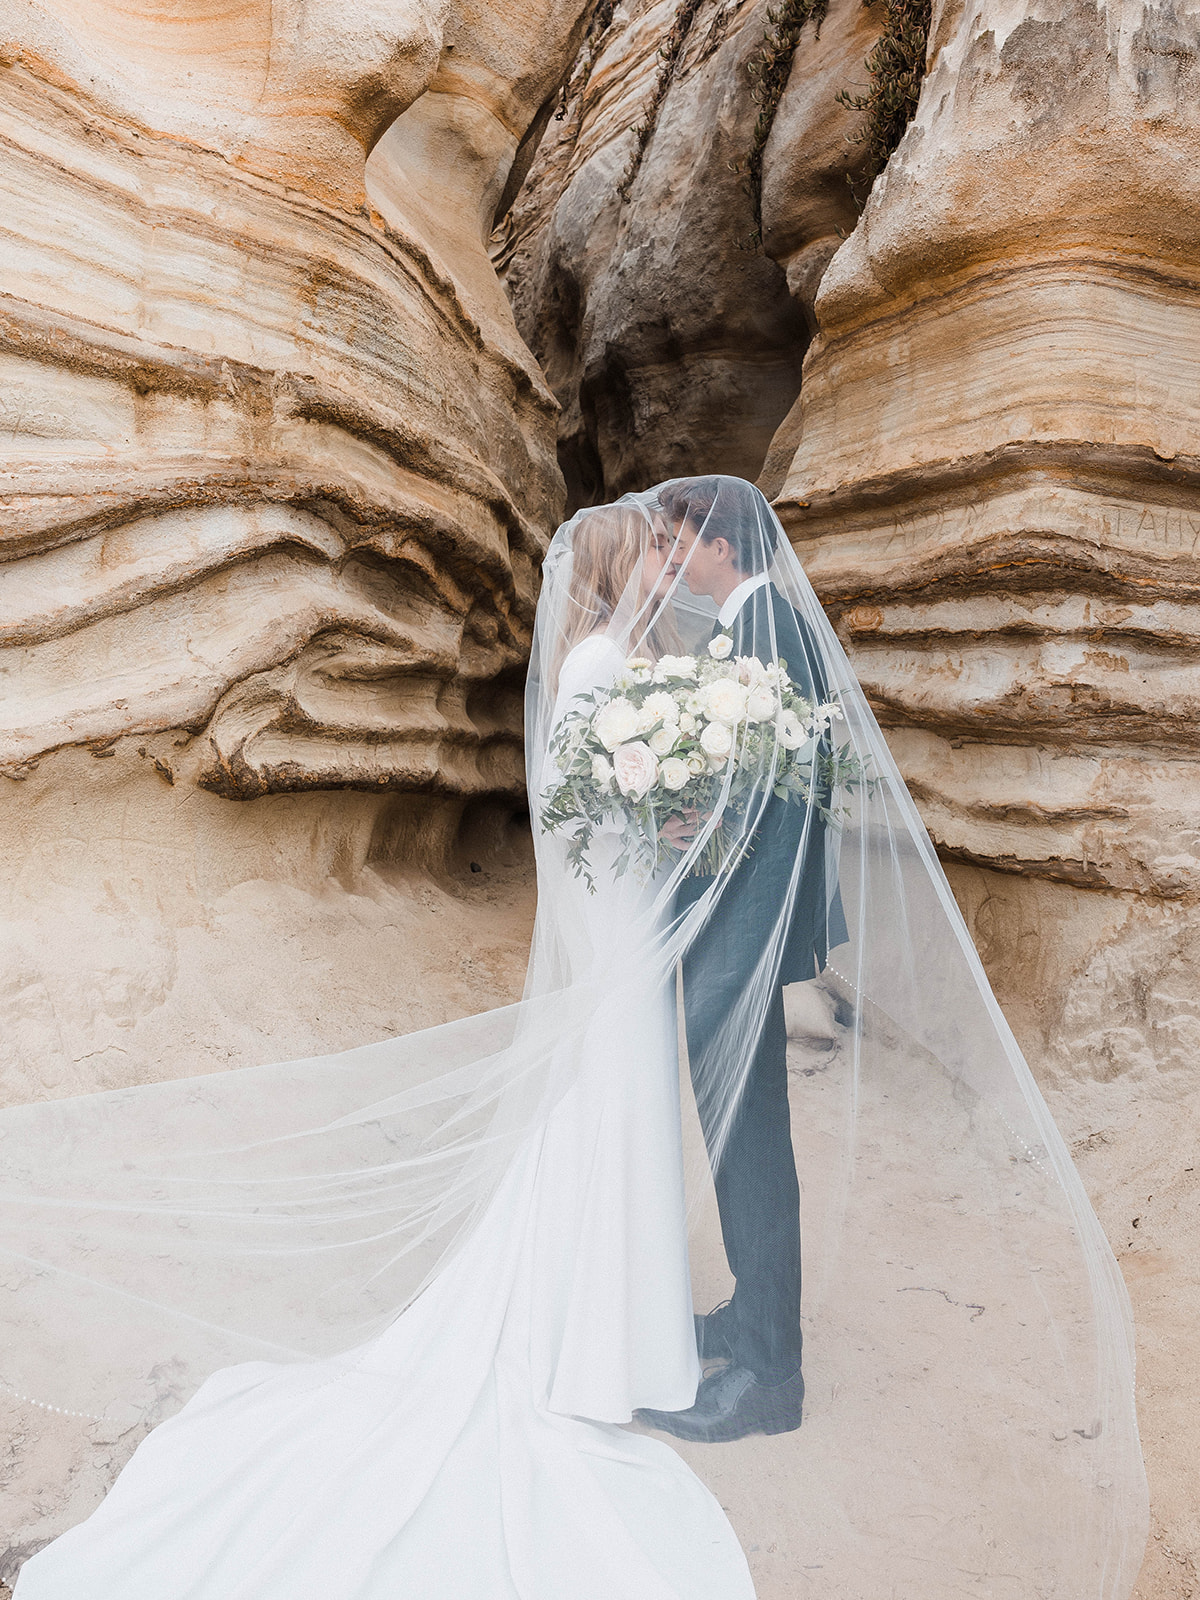 Bride and Groom kissing beneath the cliffs